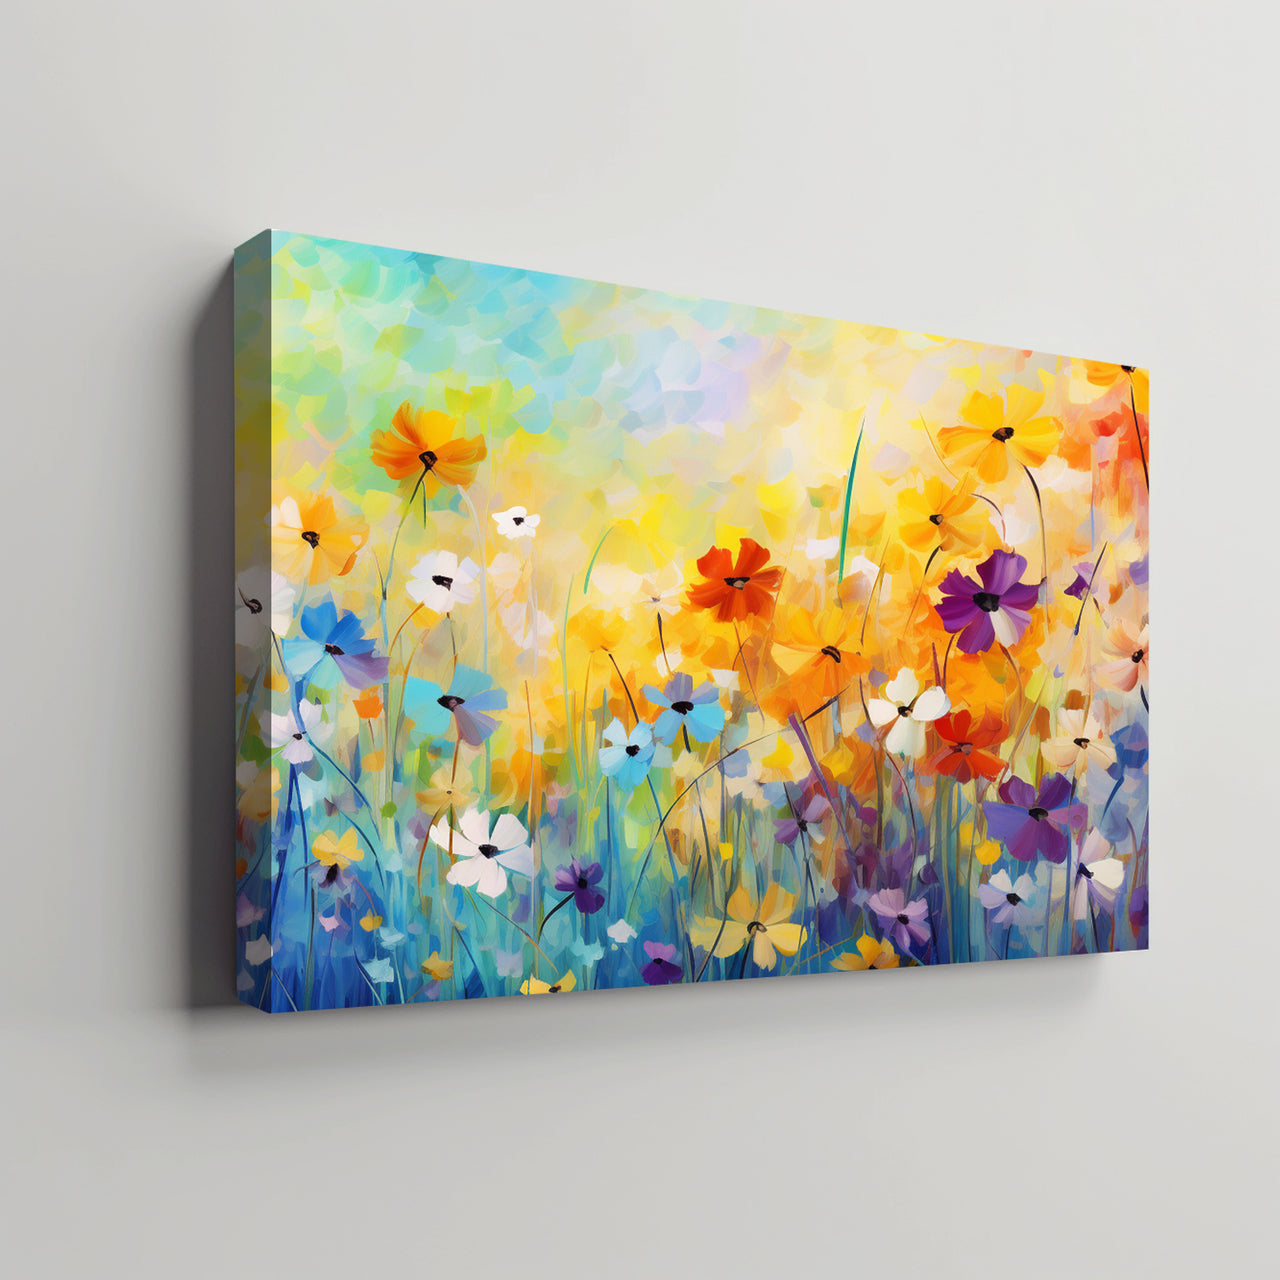 Wildflowers on Canvas, Colorful Wildflower Field Art Print 01, Minimalist Flower Wall Art, Abstract Wall Art, Watercolor flowers, Floral Print, Classic, Rustic Farmhouse, Wildflower Home Decor, Flower Painting Canvas, Floral Wall Art